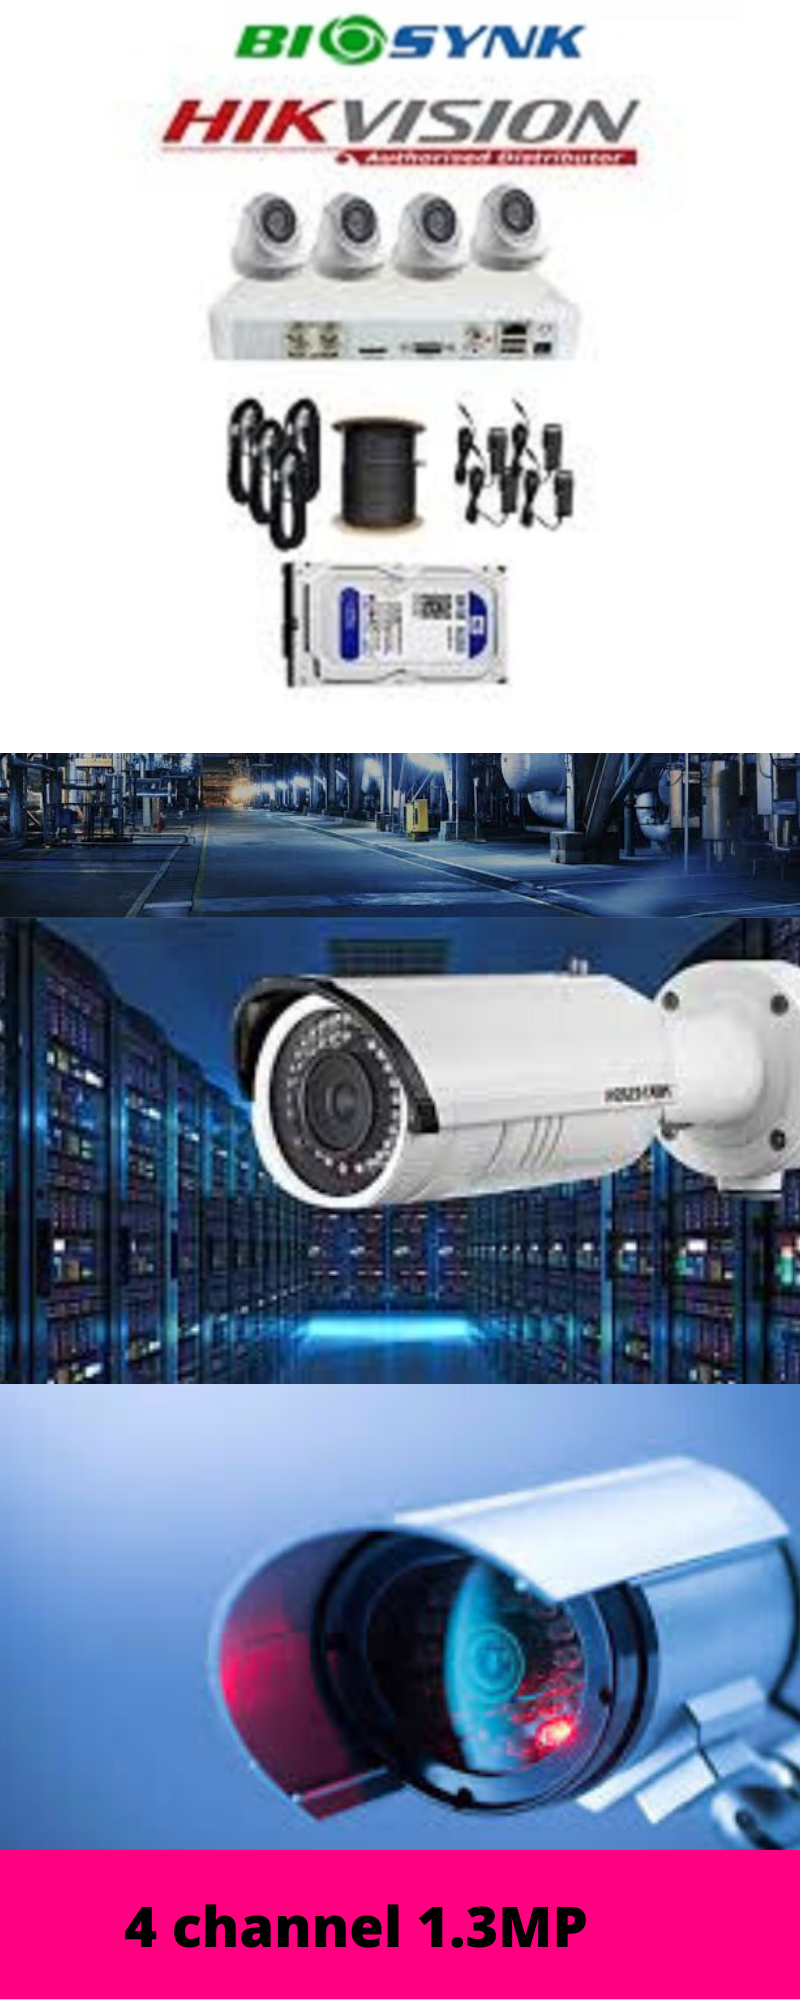 CCTV SYSTEM - ANALOGUE HD 1.3MP 4 channel 